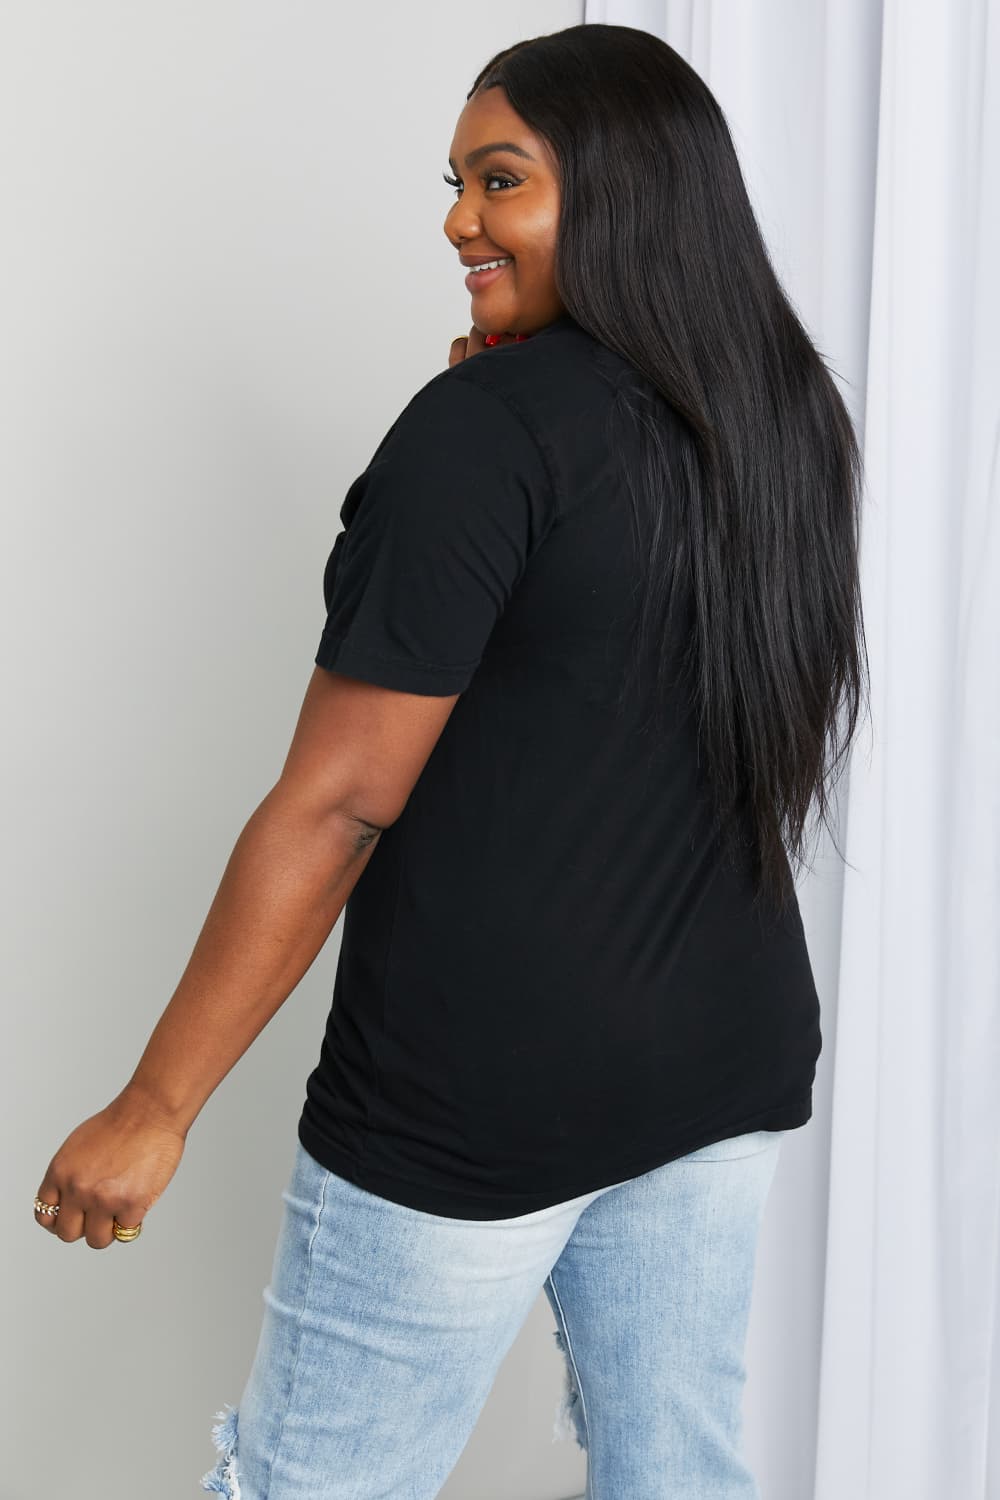 Black Simply Love Full Size Heart Graphic Cotton Tee Sentient Beauty Fashions Apparel &amp; Accessories